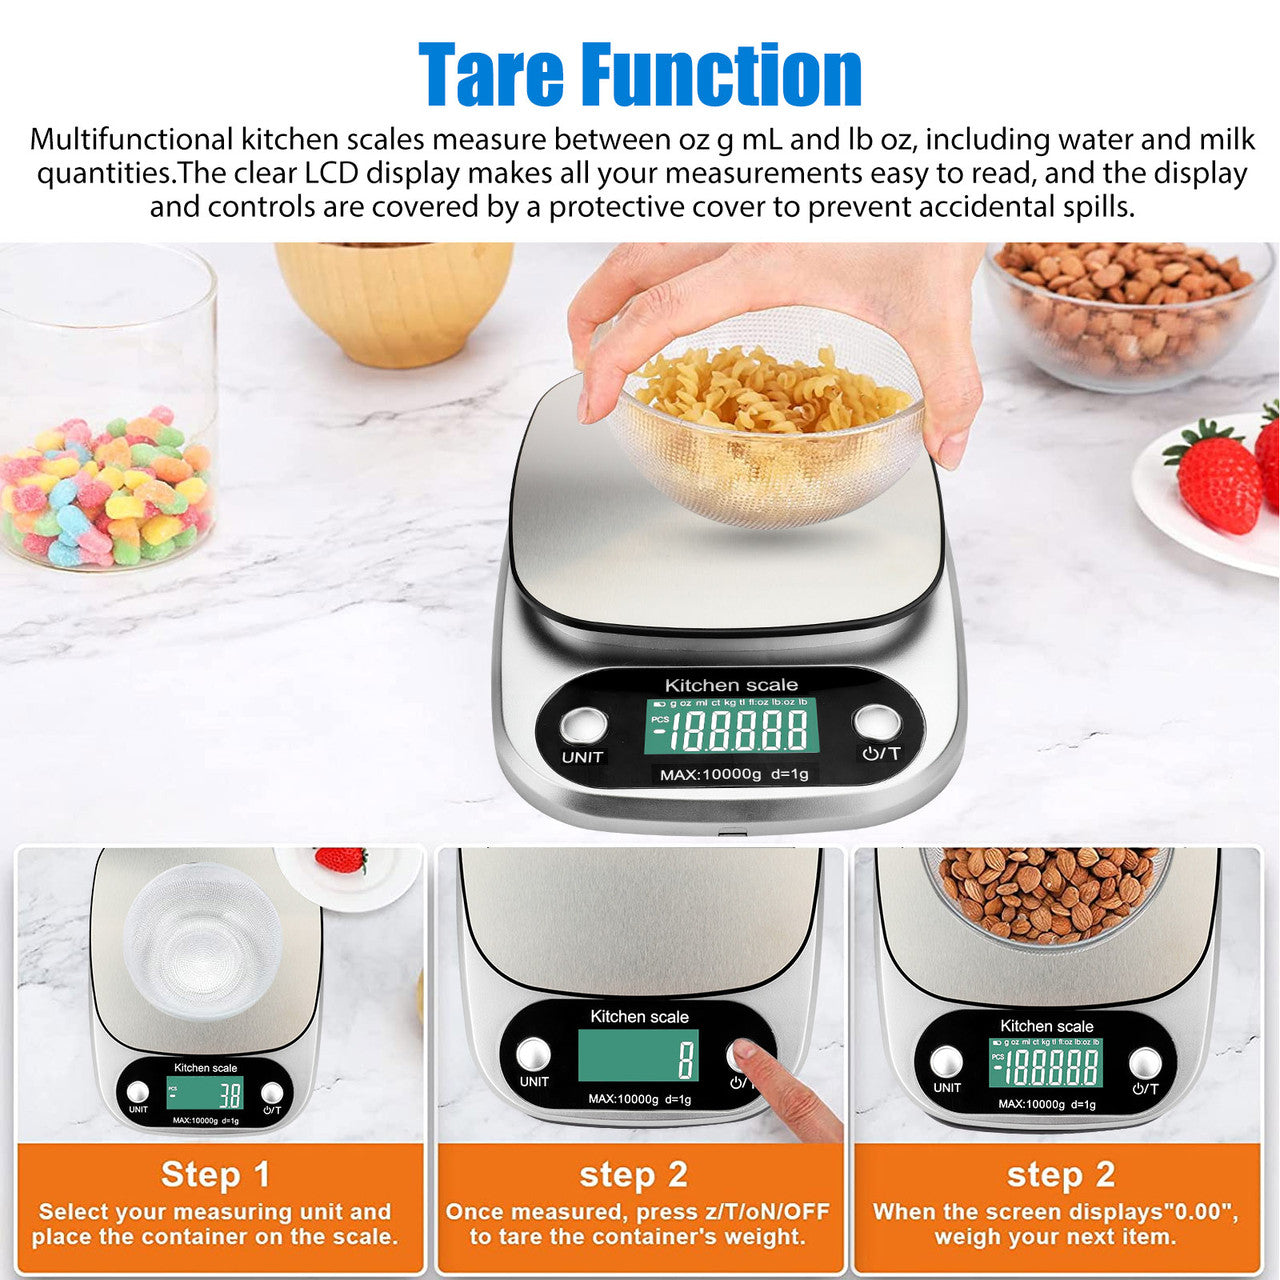 Food Kitchen Scale - Stainless Steel Digital Grams and Ounces LCD Display for Weight Loss, Baking, Cooking (Silver)